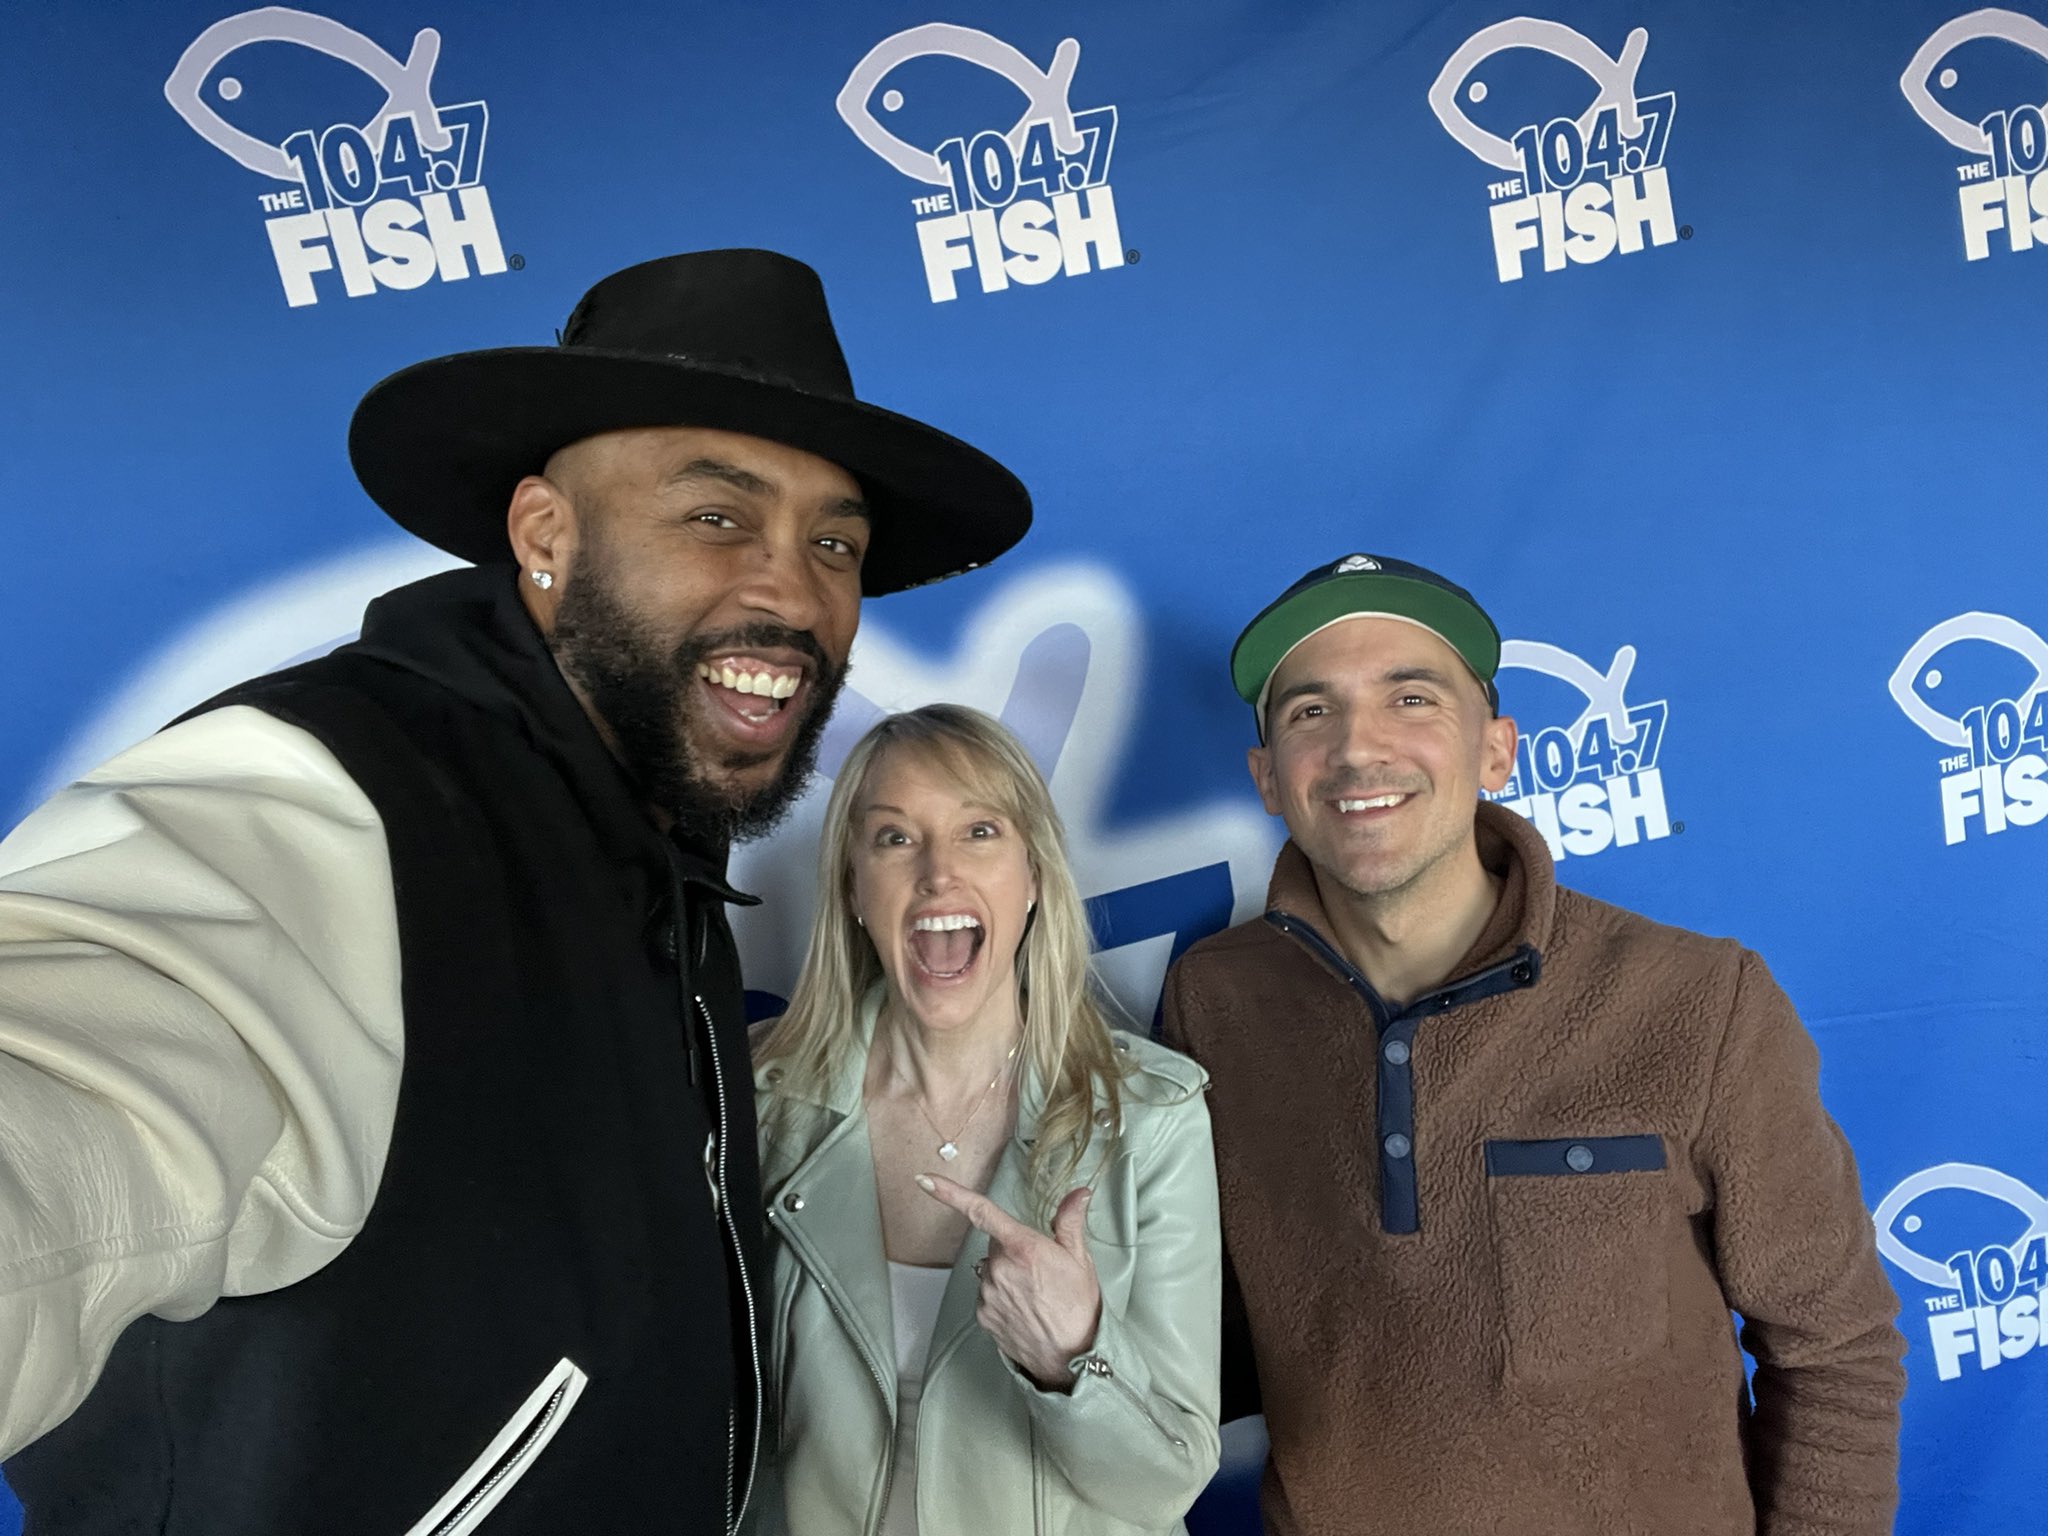 Kevin and Taylor on X: Thanks @montelljordan for hanging out with